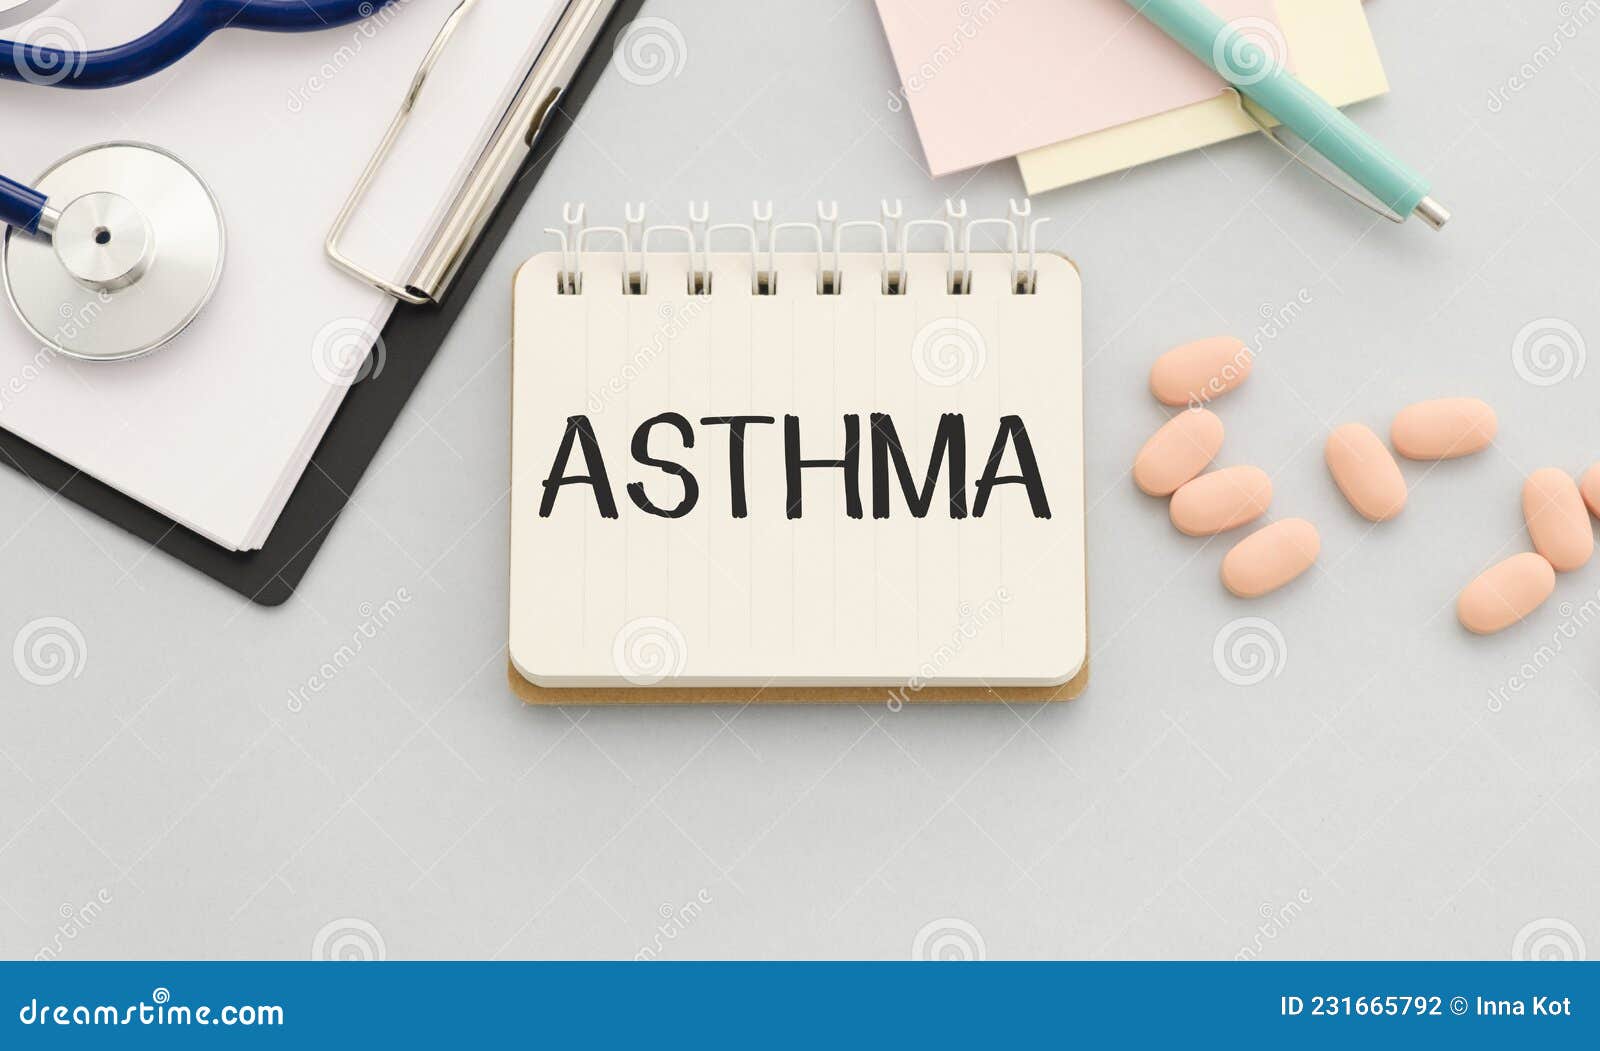 text asthma on a table with stethoscope. medicina